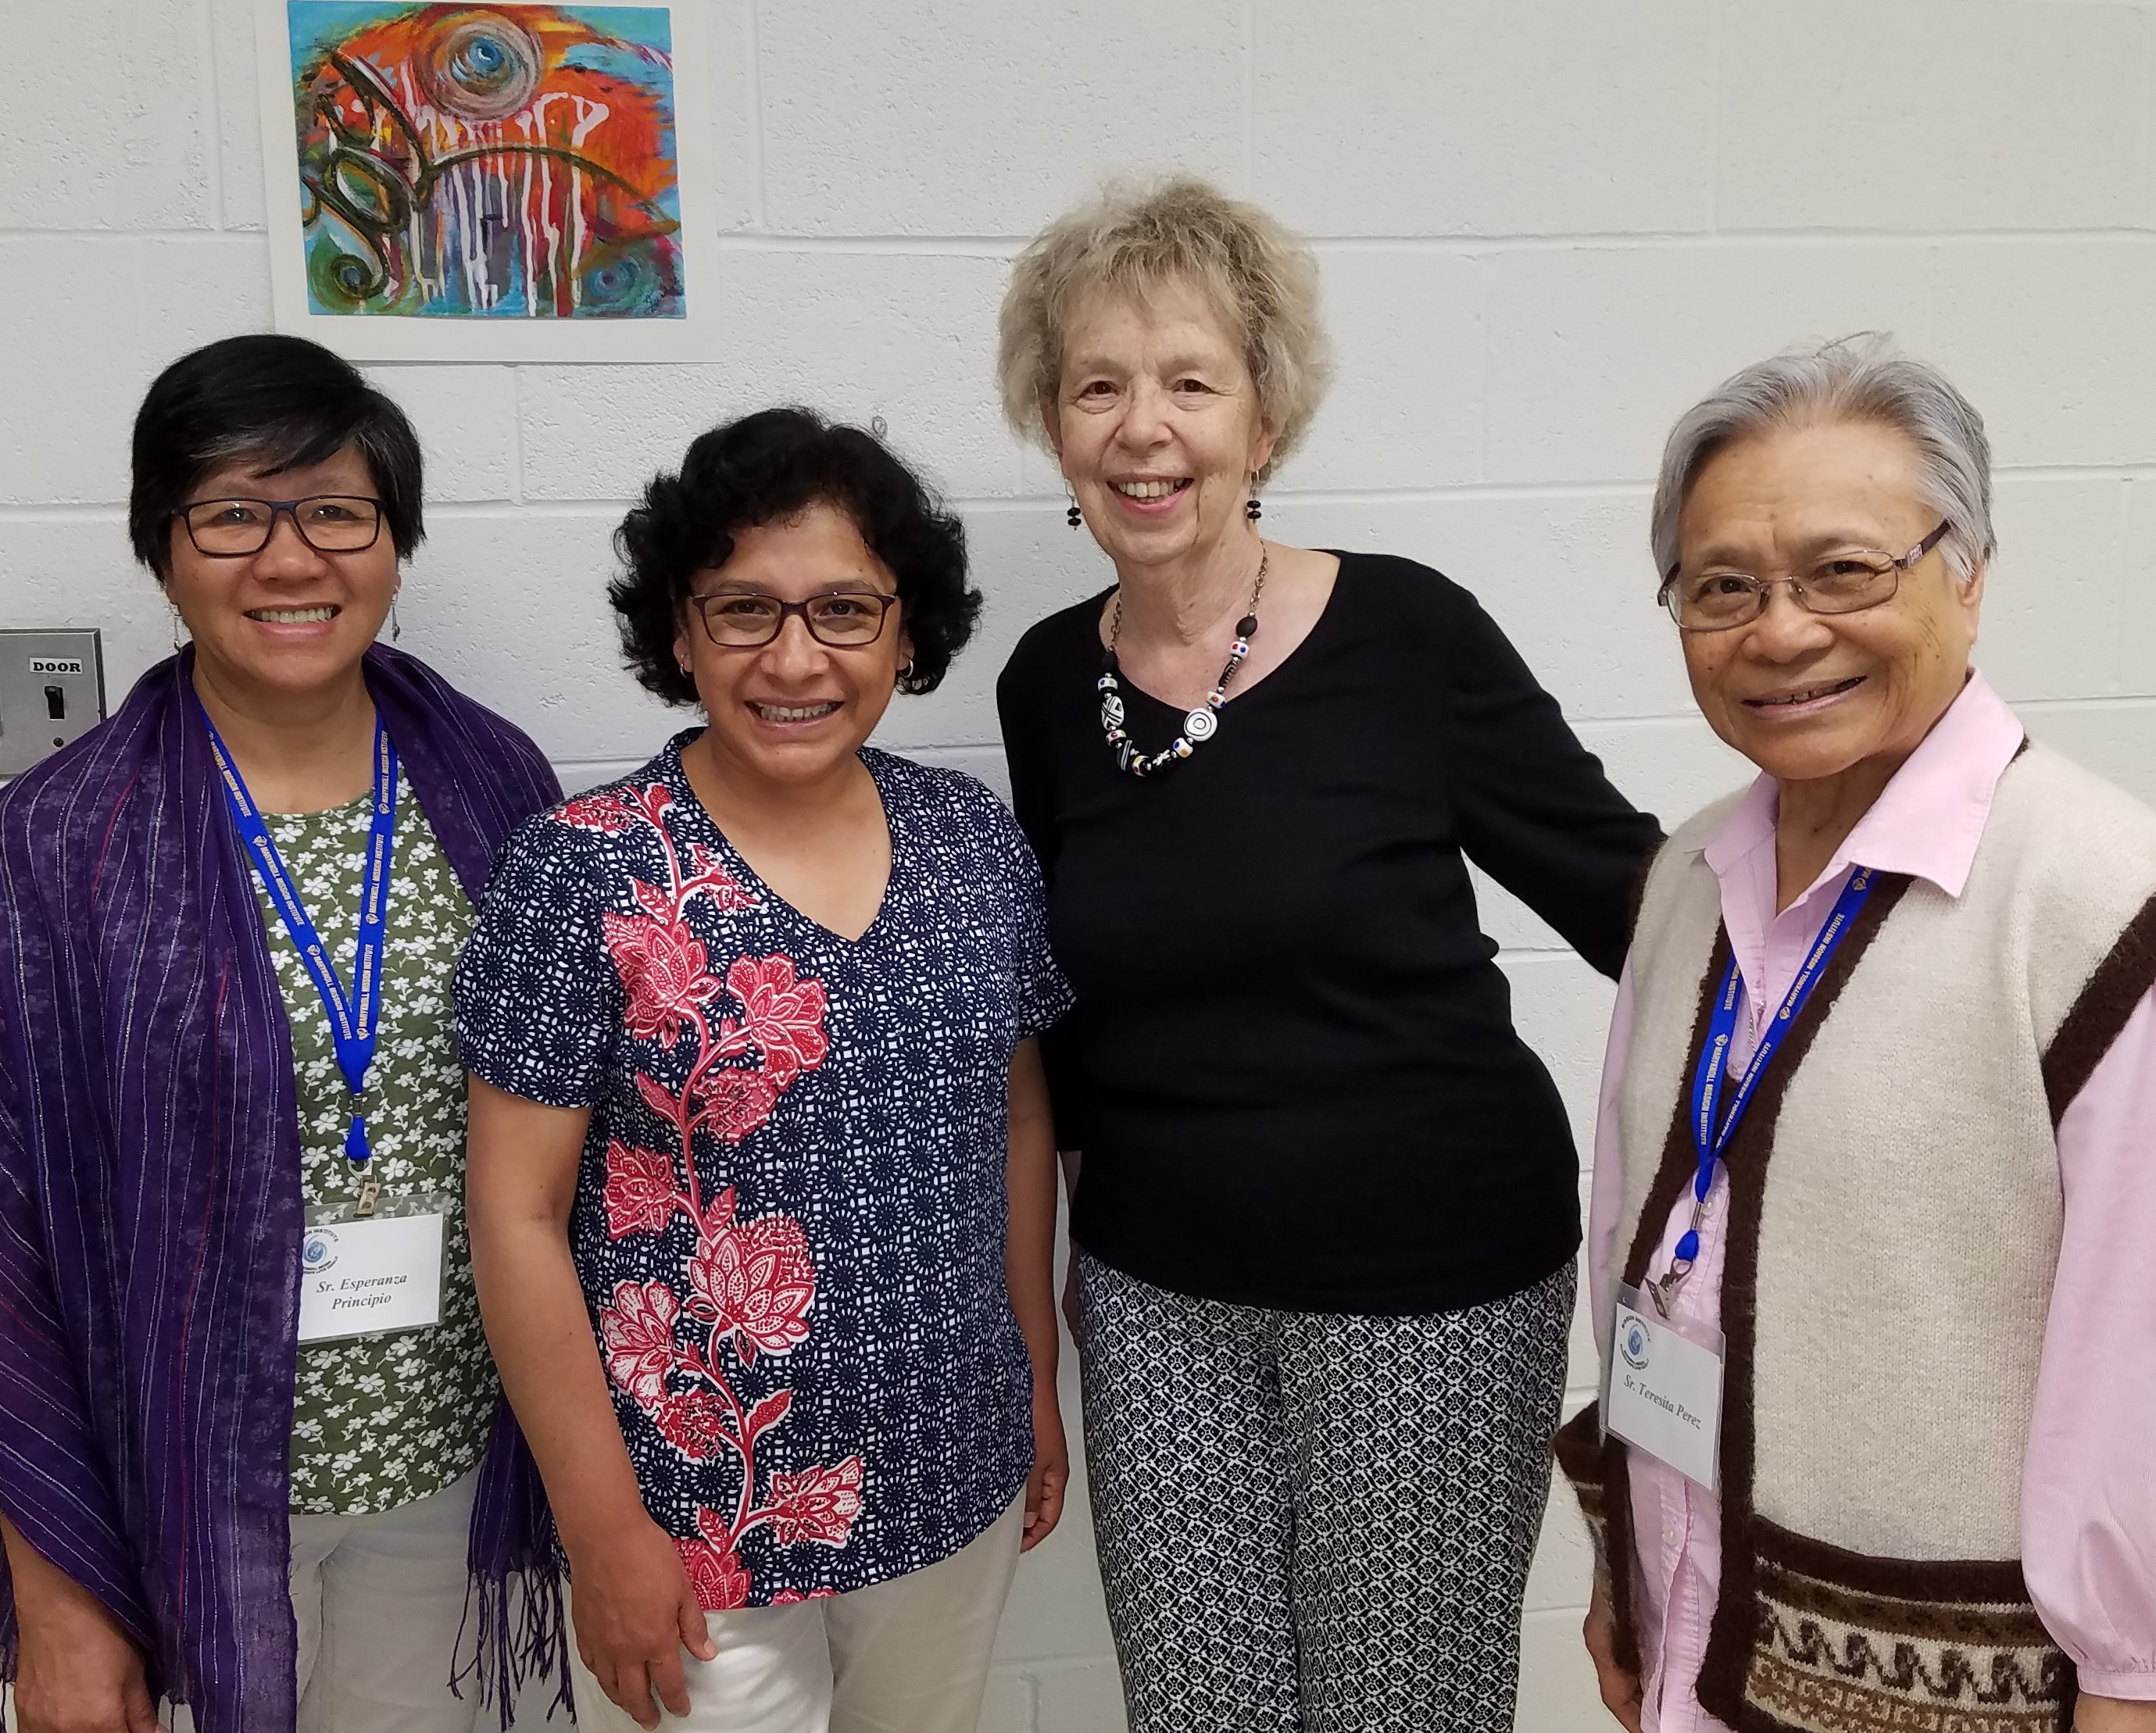 Giovana Fuentes Bendivez with friends from Maryknoll